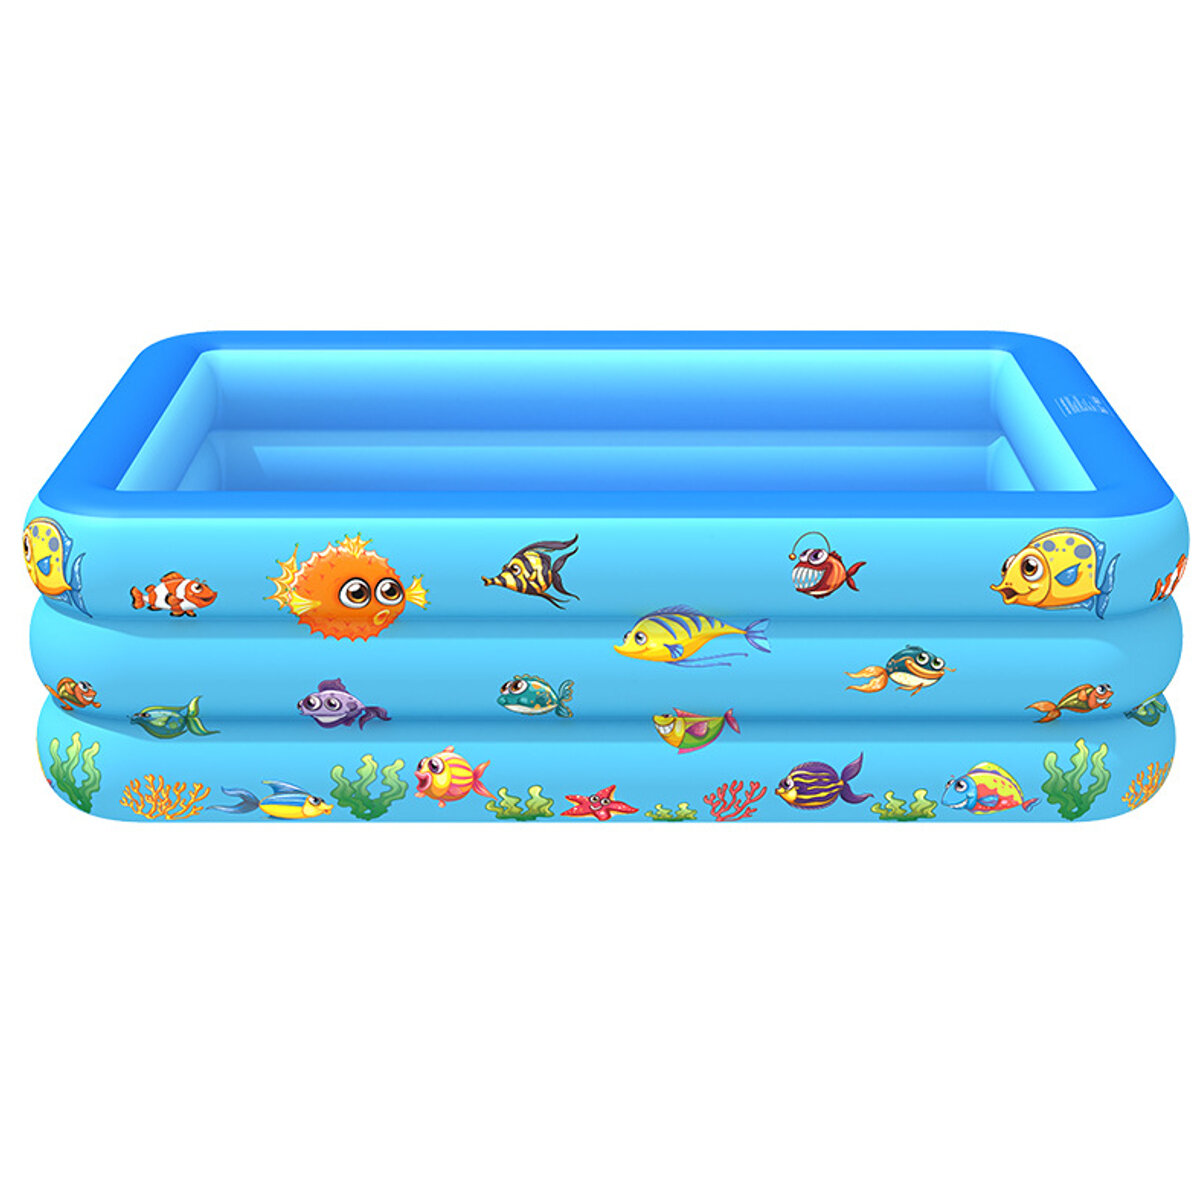 Inflatable Swimming Pool Garden Outdoor PVC Paddling Pools Kid Game Pool COD